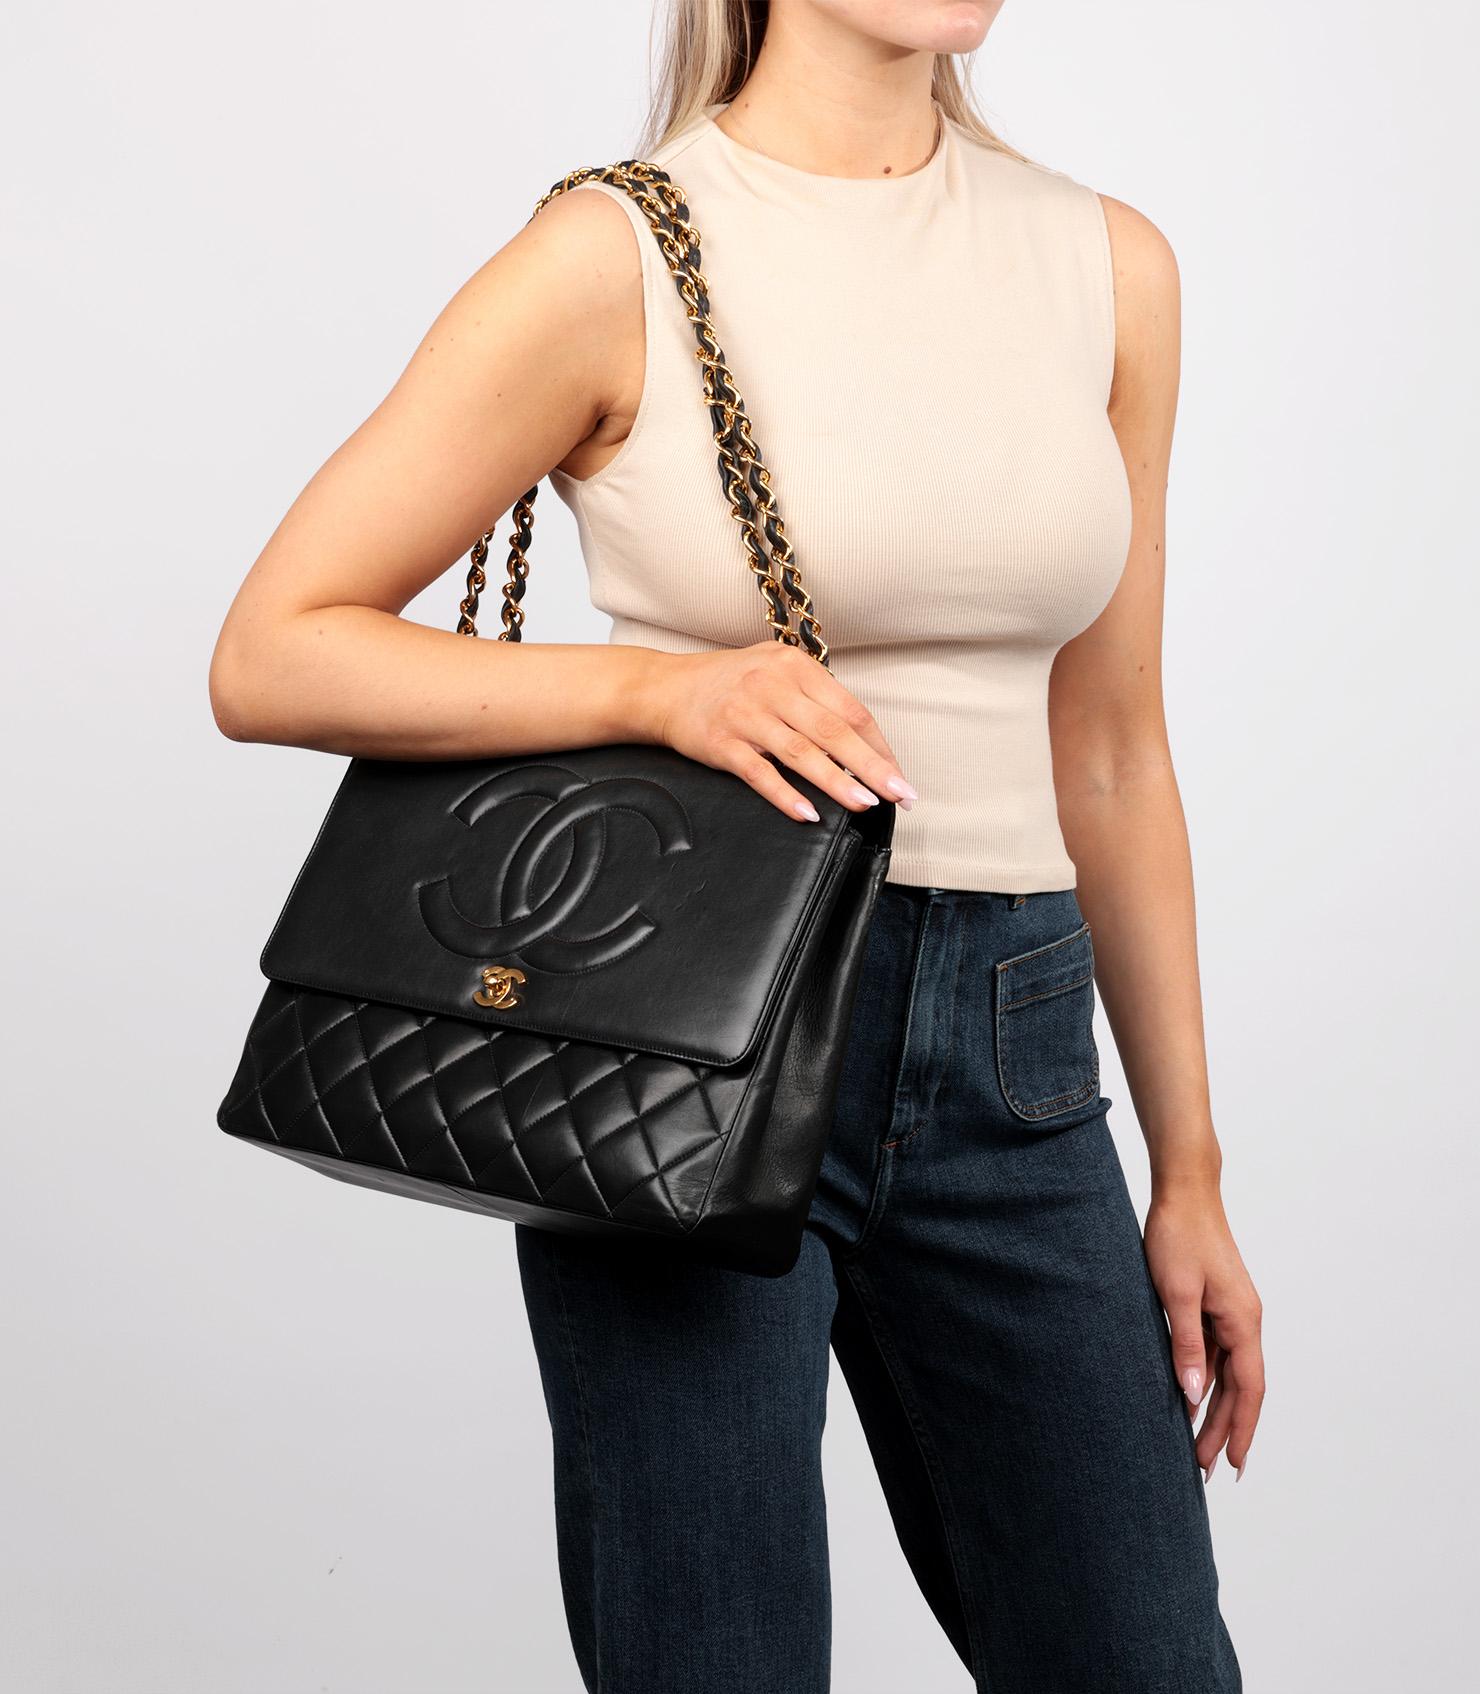 Chanel Black Quilted Lambskin Vintage Timeless Maxi Jumbo Classic Single Flap Bag

Brand- Chanel
Model- Timeless Maxi Jumbo Classic Single Flap Bag
Product Type- Crossbody, Shoulder
Serial Number- 24*****
Age- Circa 1991
Accompanied By- Care